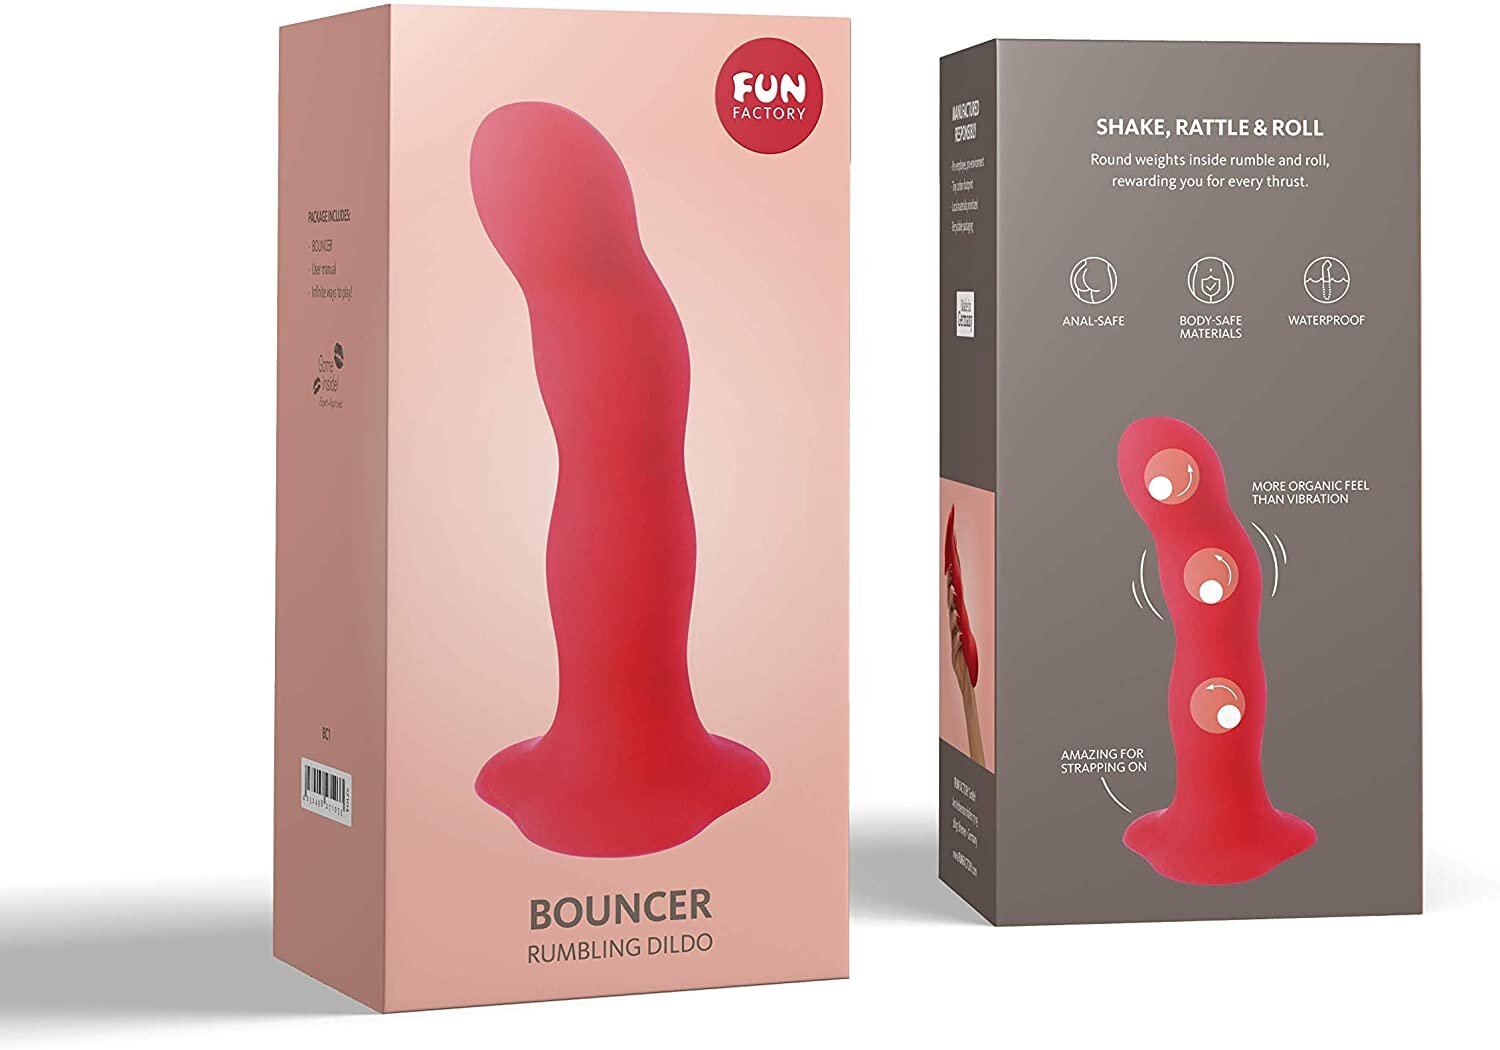 Bouncer by Fun Factory (Amazon store)